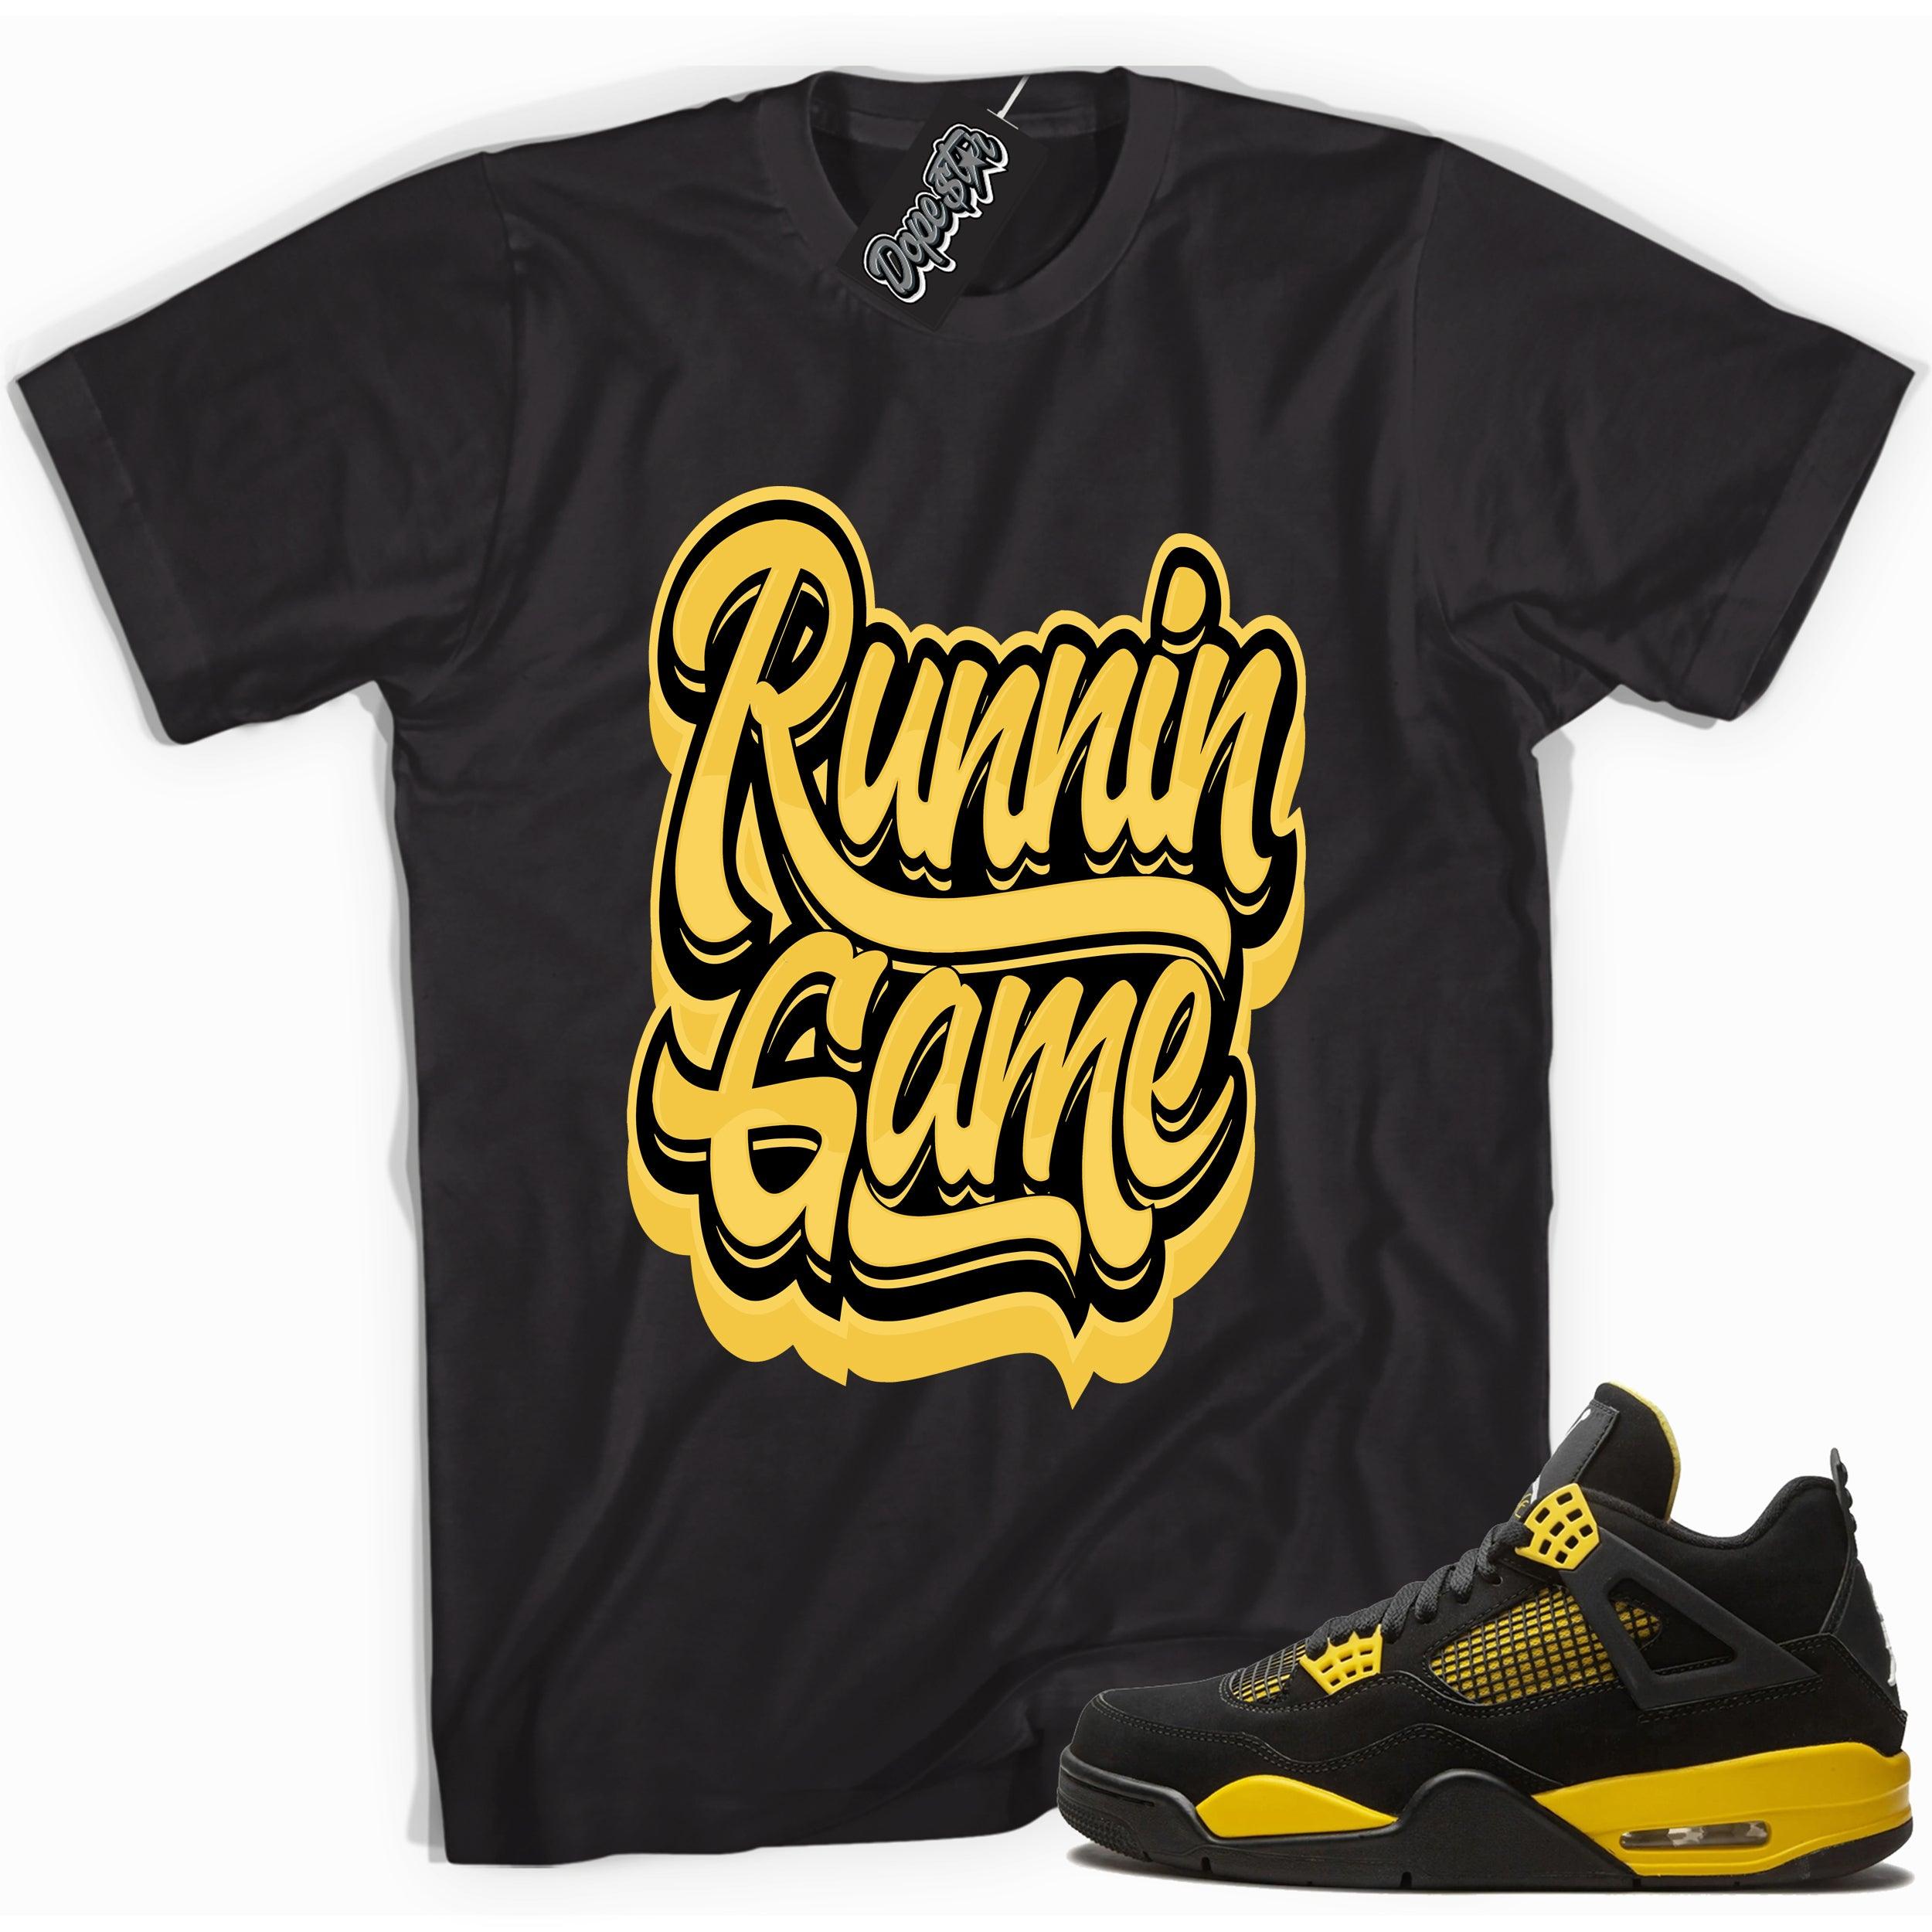 Cool black graphic tee with 'running game' print, that perfectly matches  Air Jordan 4 Thunder sneakers